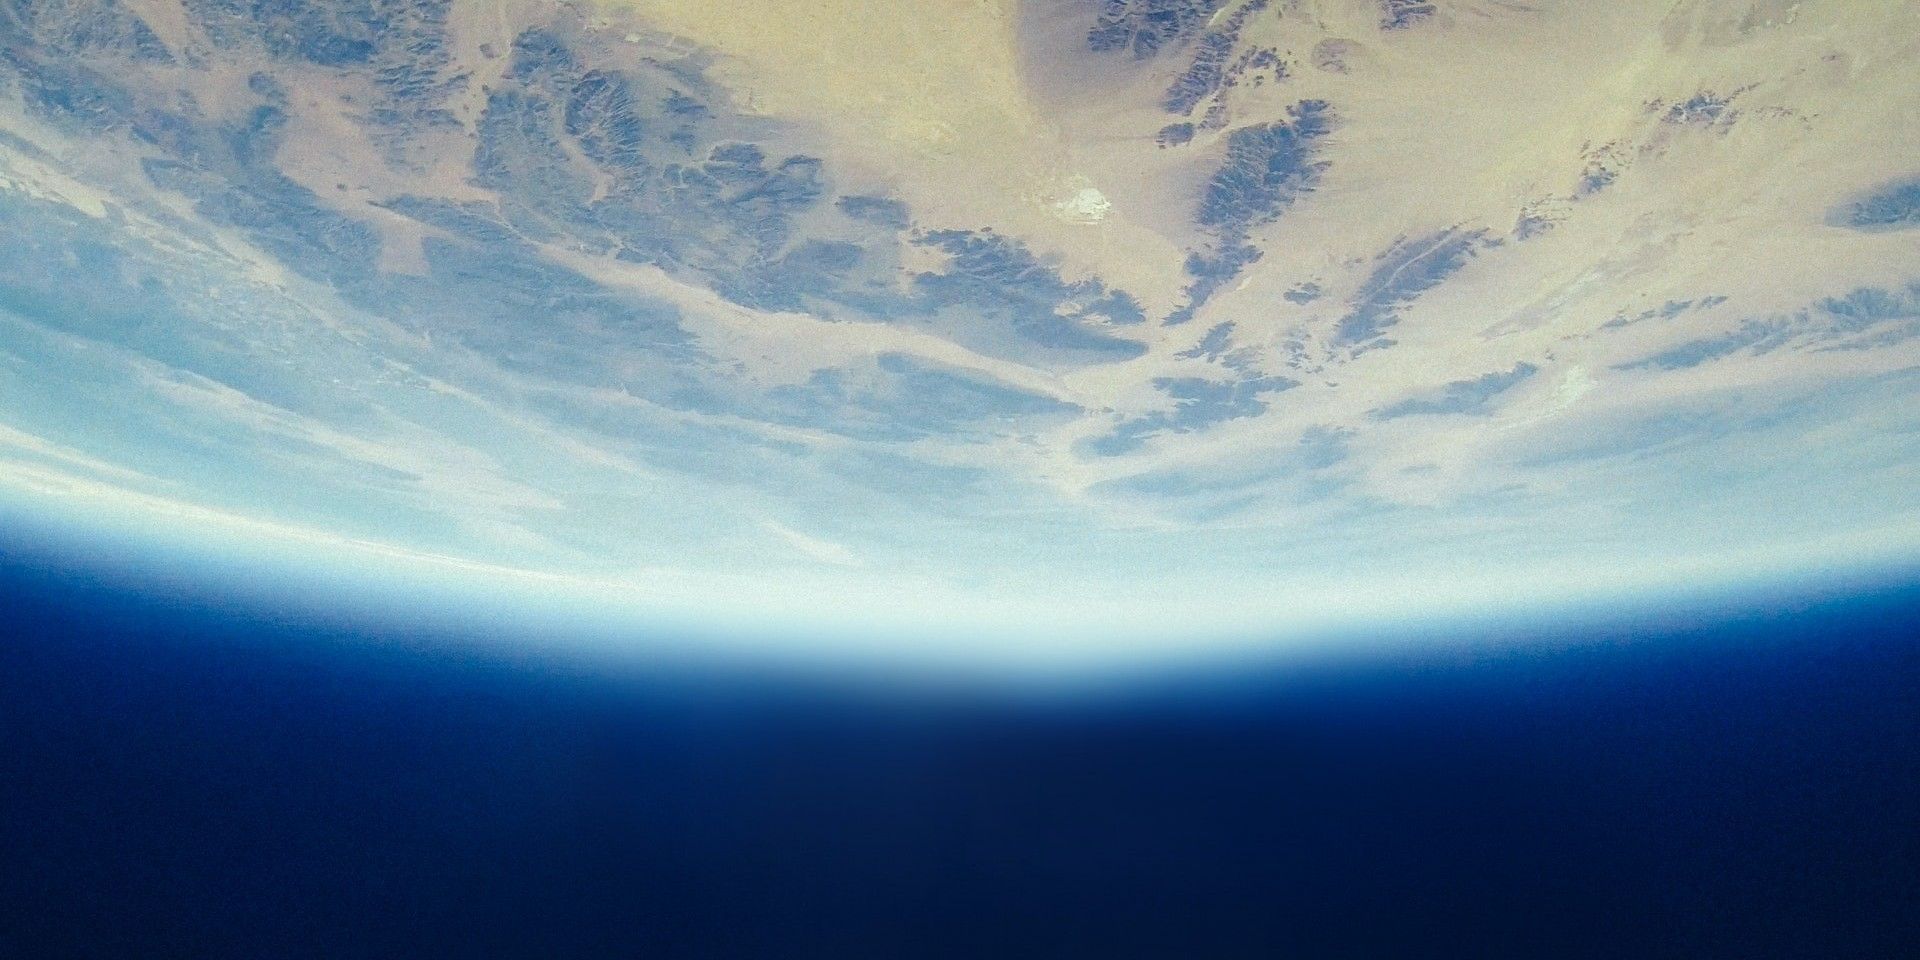 Earth's Atmosphere from Space